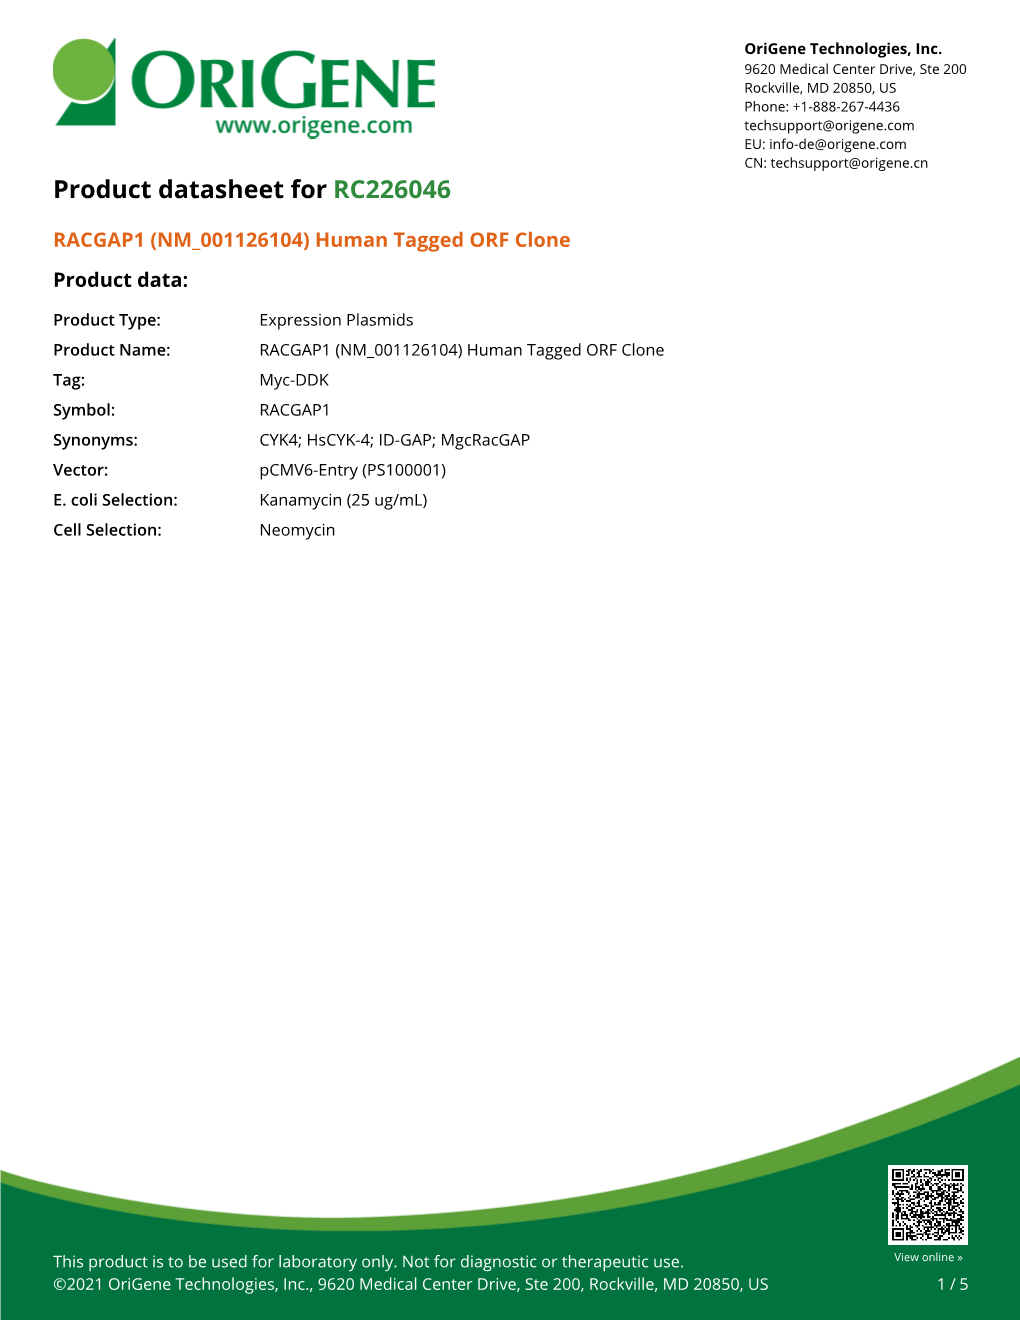 RACGAP1 (NM 001126104) Human Tagged ORF Clone Product Data